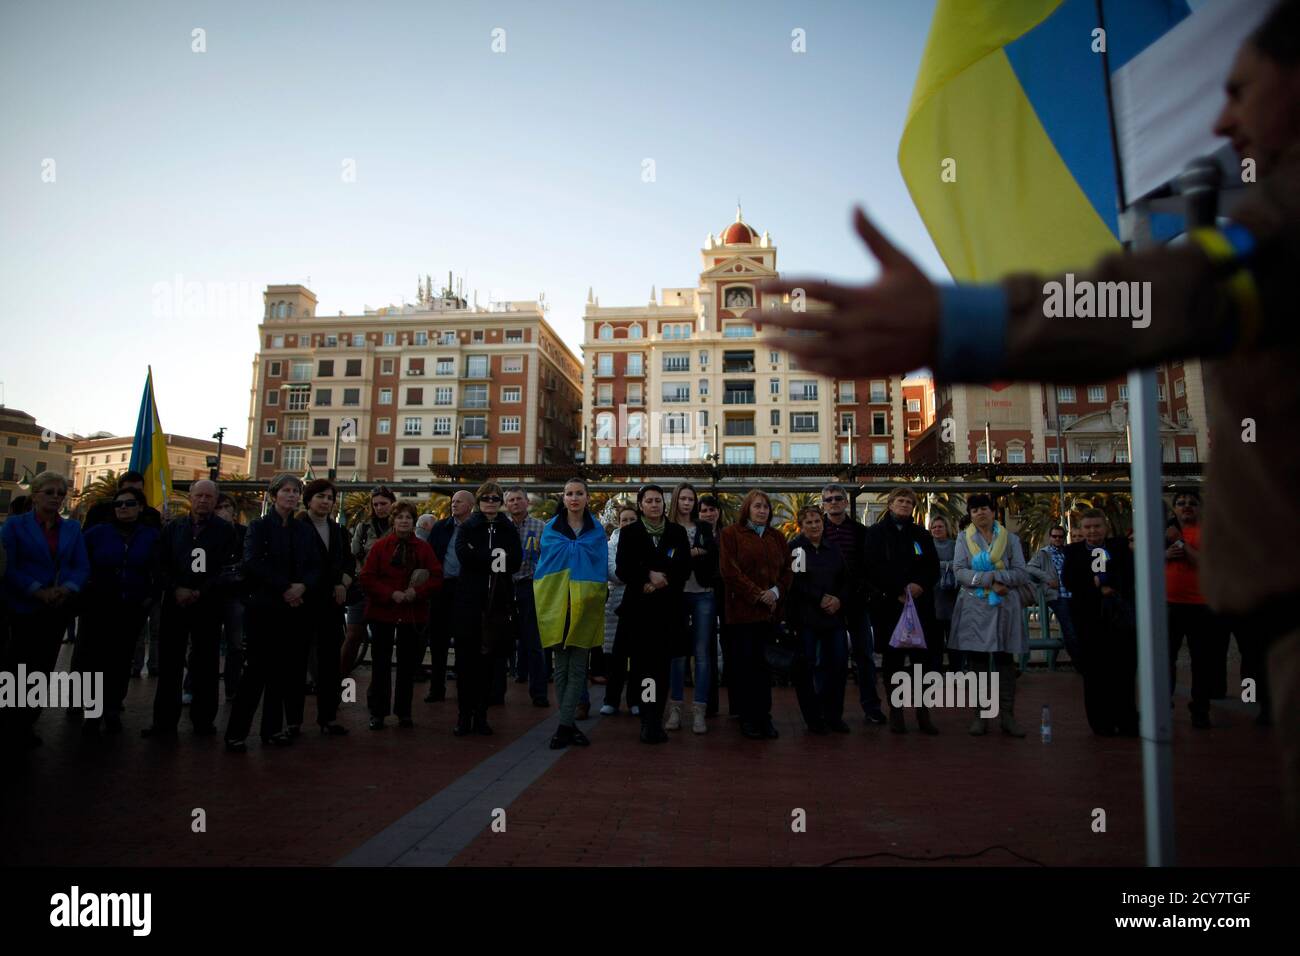 Ukrainians living in Malaga stand while a compatriot (R) talks to them during a protest against Russian President Vladimir Putin and in favor of unity and democratic freedom in Ukraine, in downtown Malaga, southern Spain, March 16, 2014. France on Sunday demanded Russia immediately take measures to reduce 'pointless and dangerous' tensions in Ukraine, calling the secession referendum held in the Crimea region illegal. REUTERS/Jon Nazca (SPAIN - Tags: POLITICS CIVIL UNREST ELECTIONS) Stock Photo